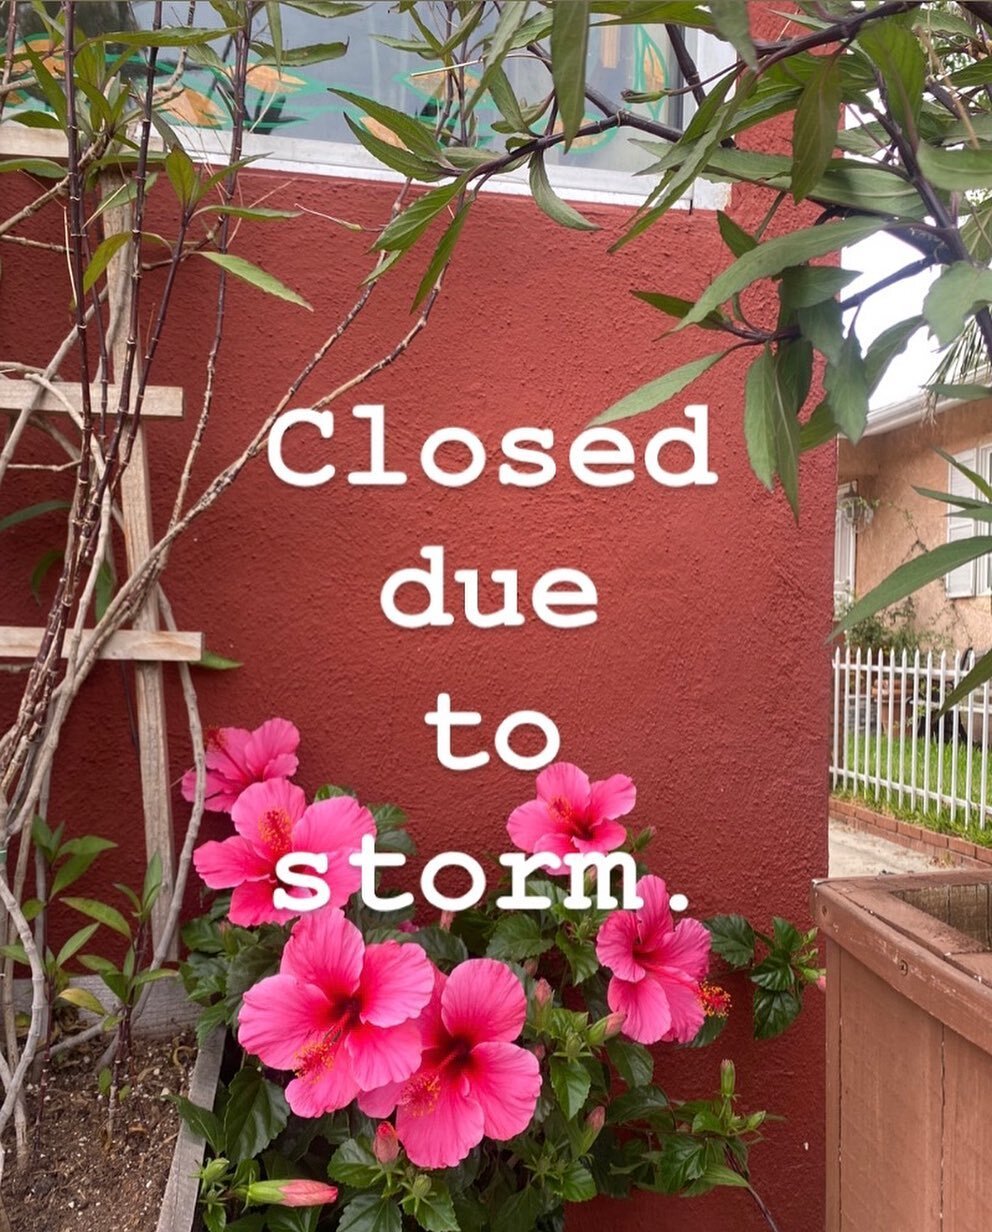 Hey y&rsquo;all! We wanted to play it by ear, but decided to close tomorrow 8/20. Weather is unpredictable and we rather play it safe! We don&rsquo;t want our team or y&rsquo;all to be driving out there like that. Looks like we are still opening Mond